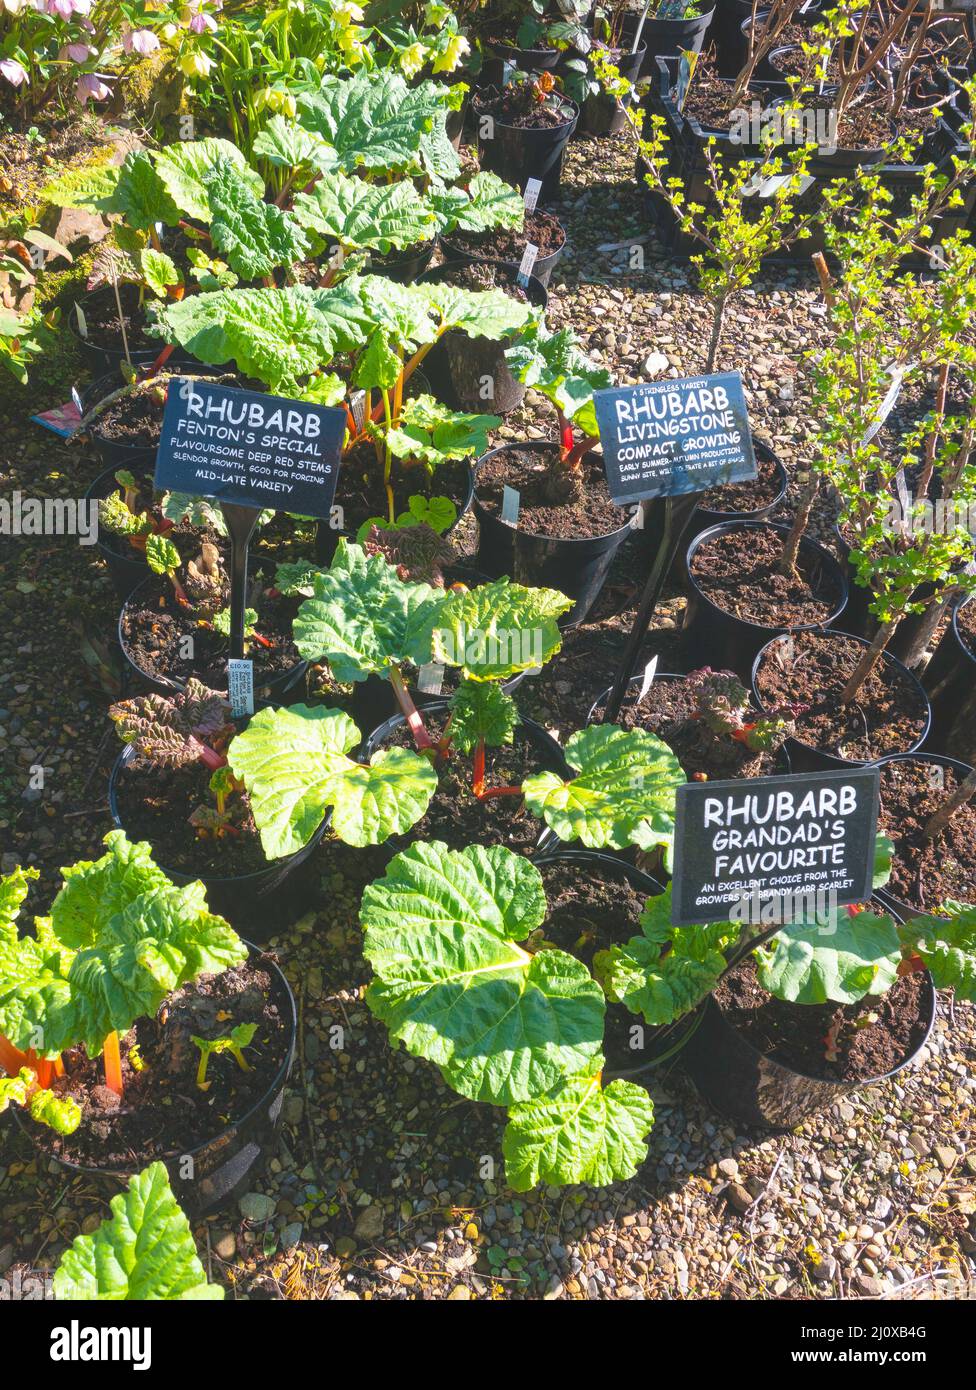 Garden Centre display of rhubarb plants of several varieties Rhubarb Livingstone, Grandads Favourite and Fentons special Stock Photo